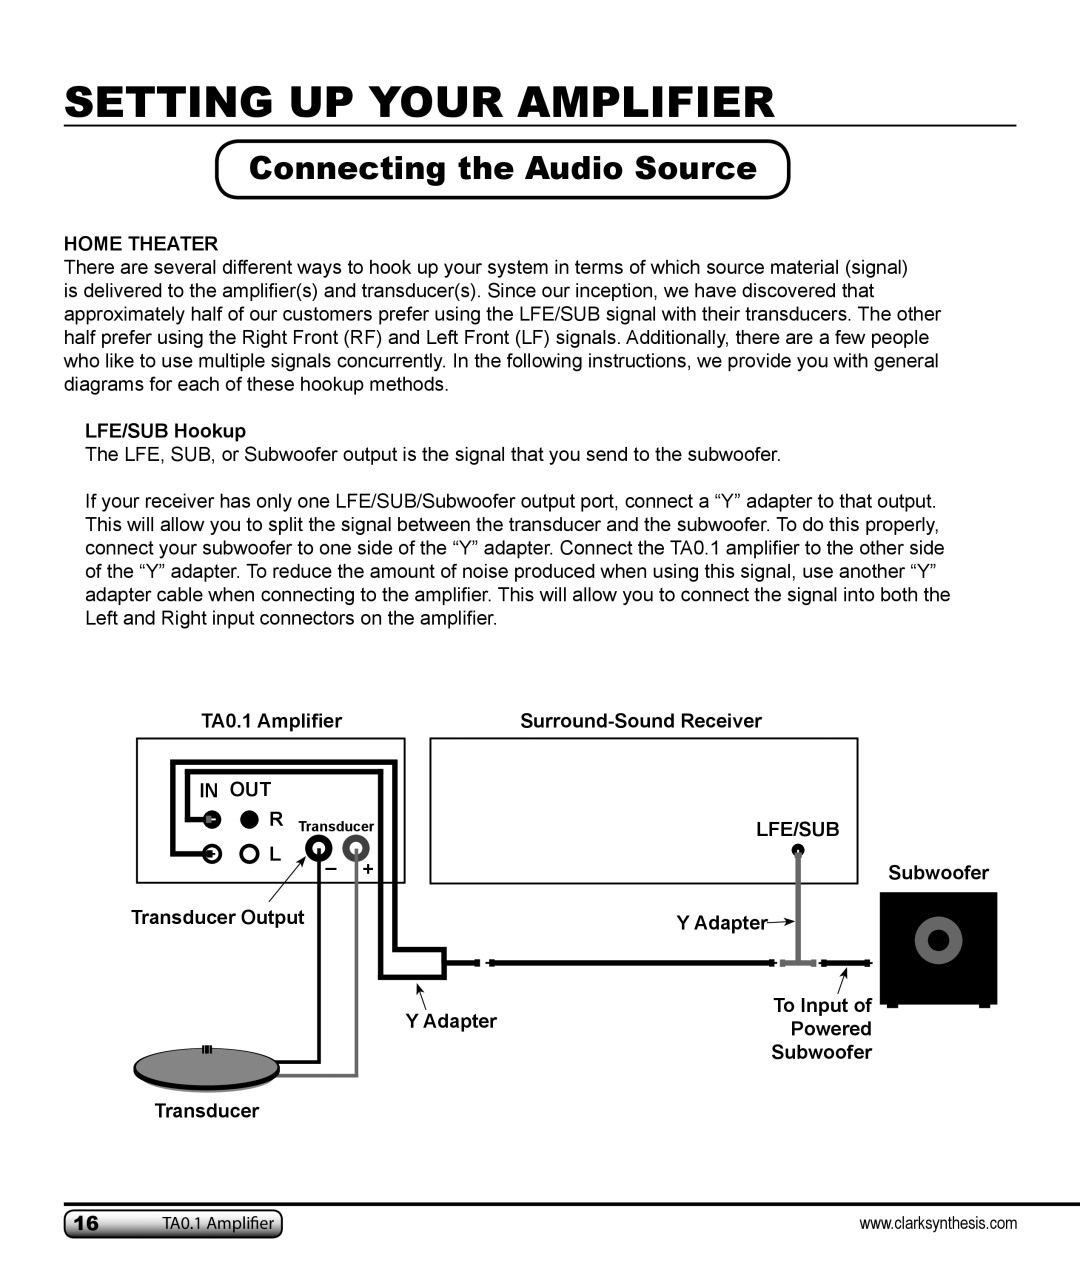 Clark Synthesis TA0.1 owner manual Connecting the Audio Source, Setting Up Your Amplifier 